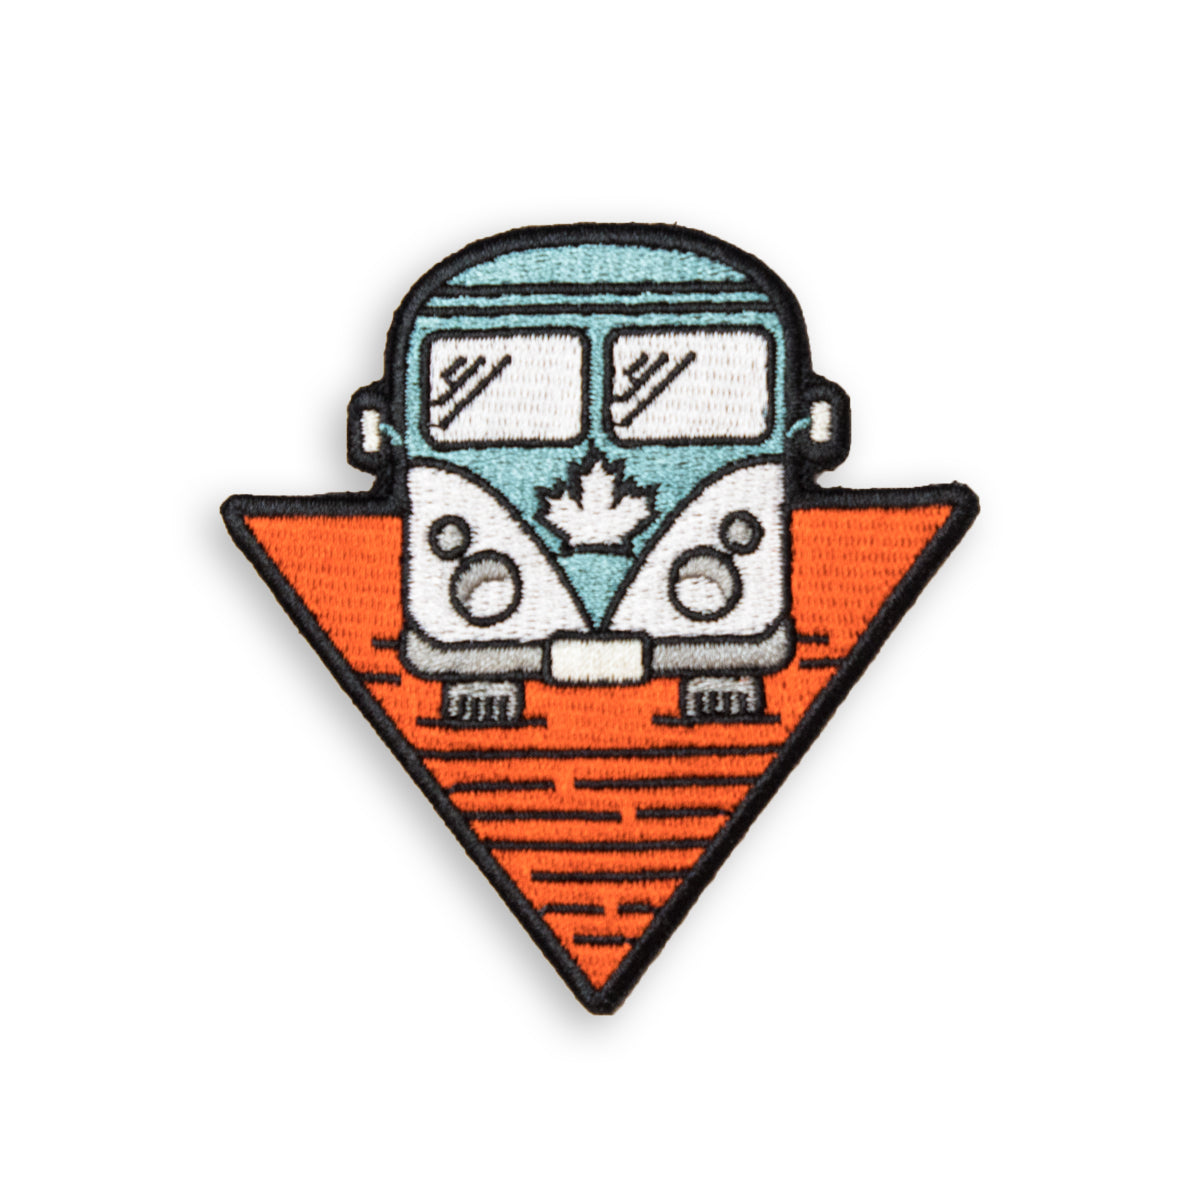 3" x 3" embroidered road trippin patch showcasing a volkswagen type van